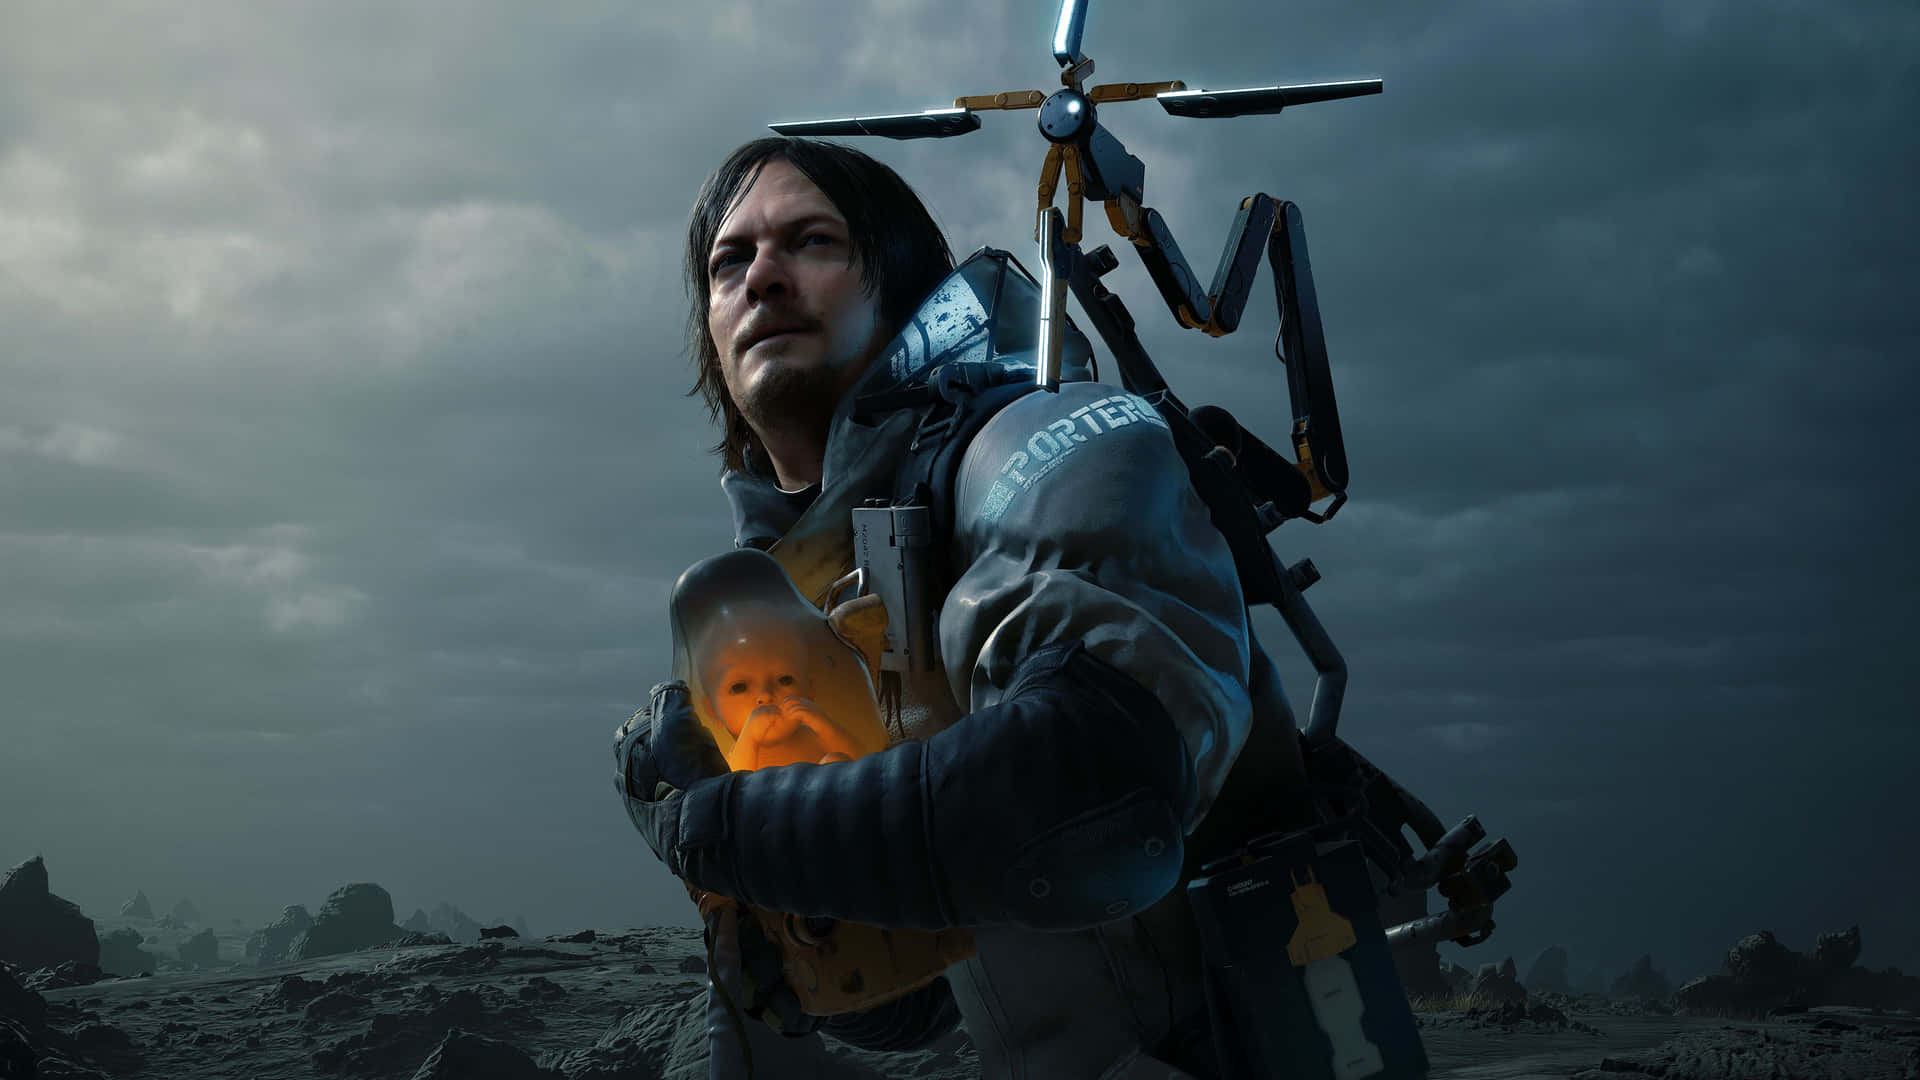 "Explore the Post-Apocalyptic world with the game Death Stranding HD!" Wallpaper